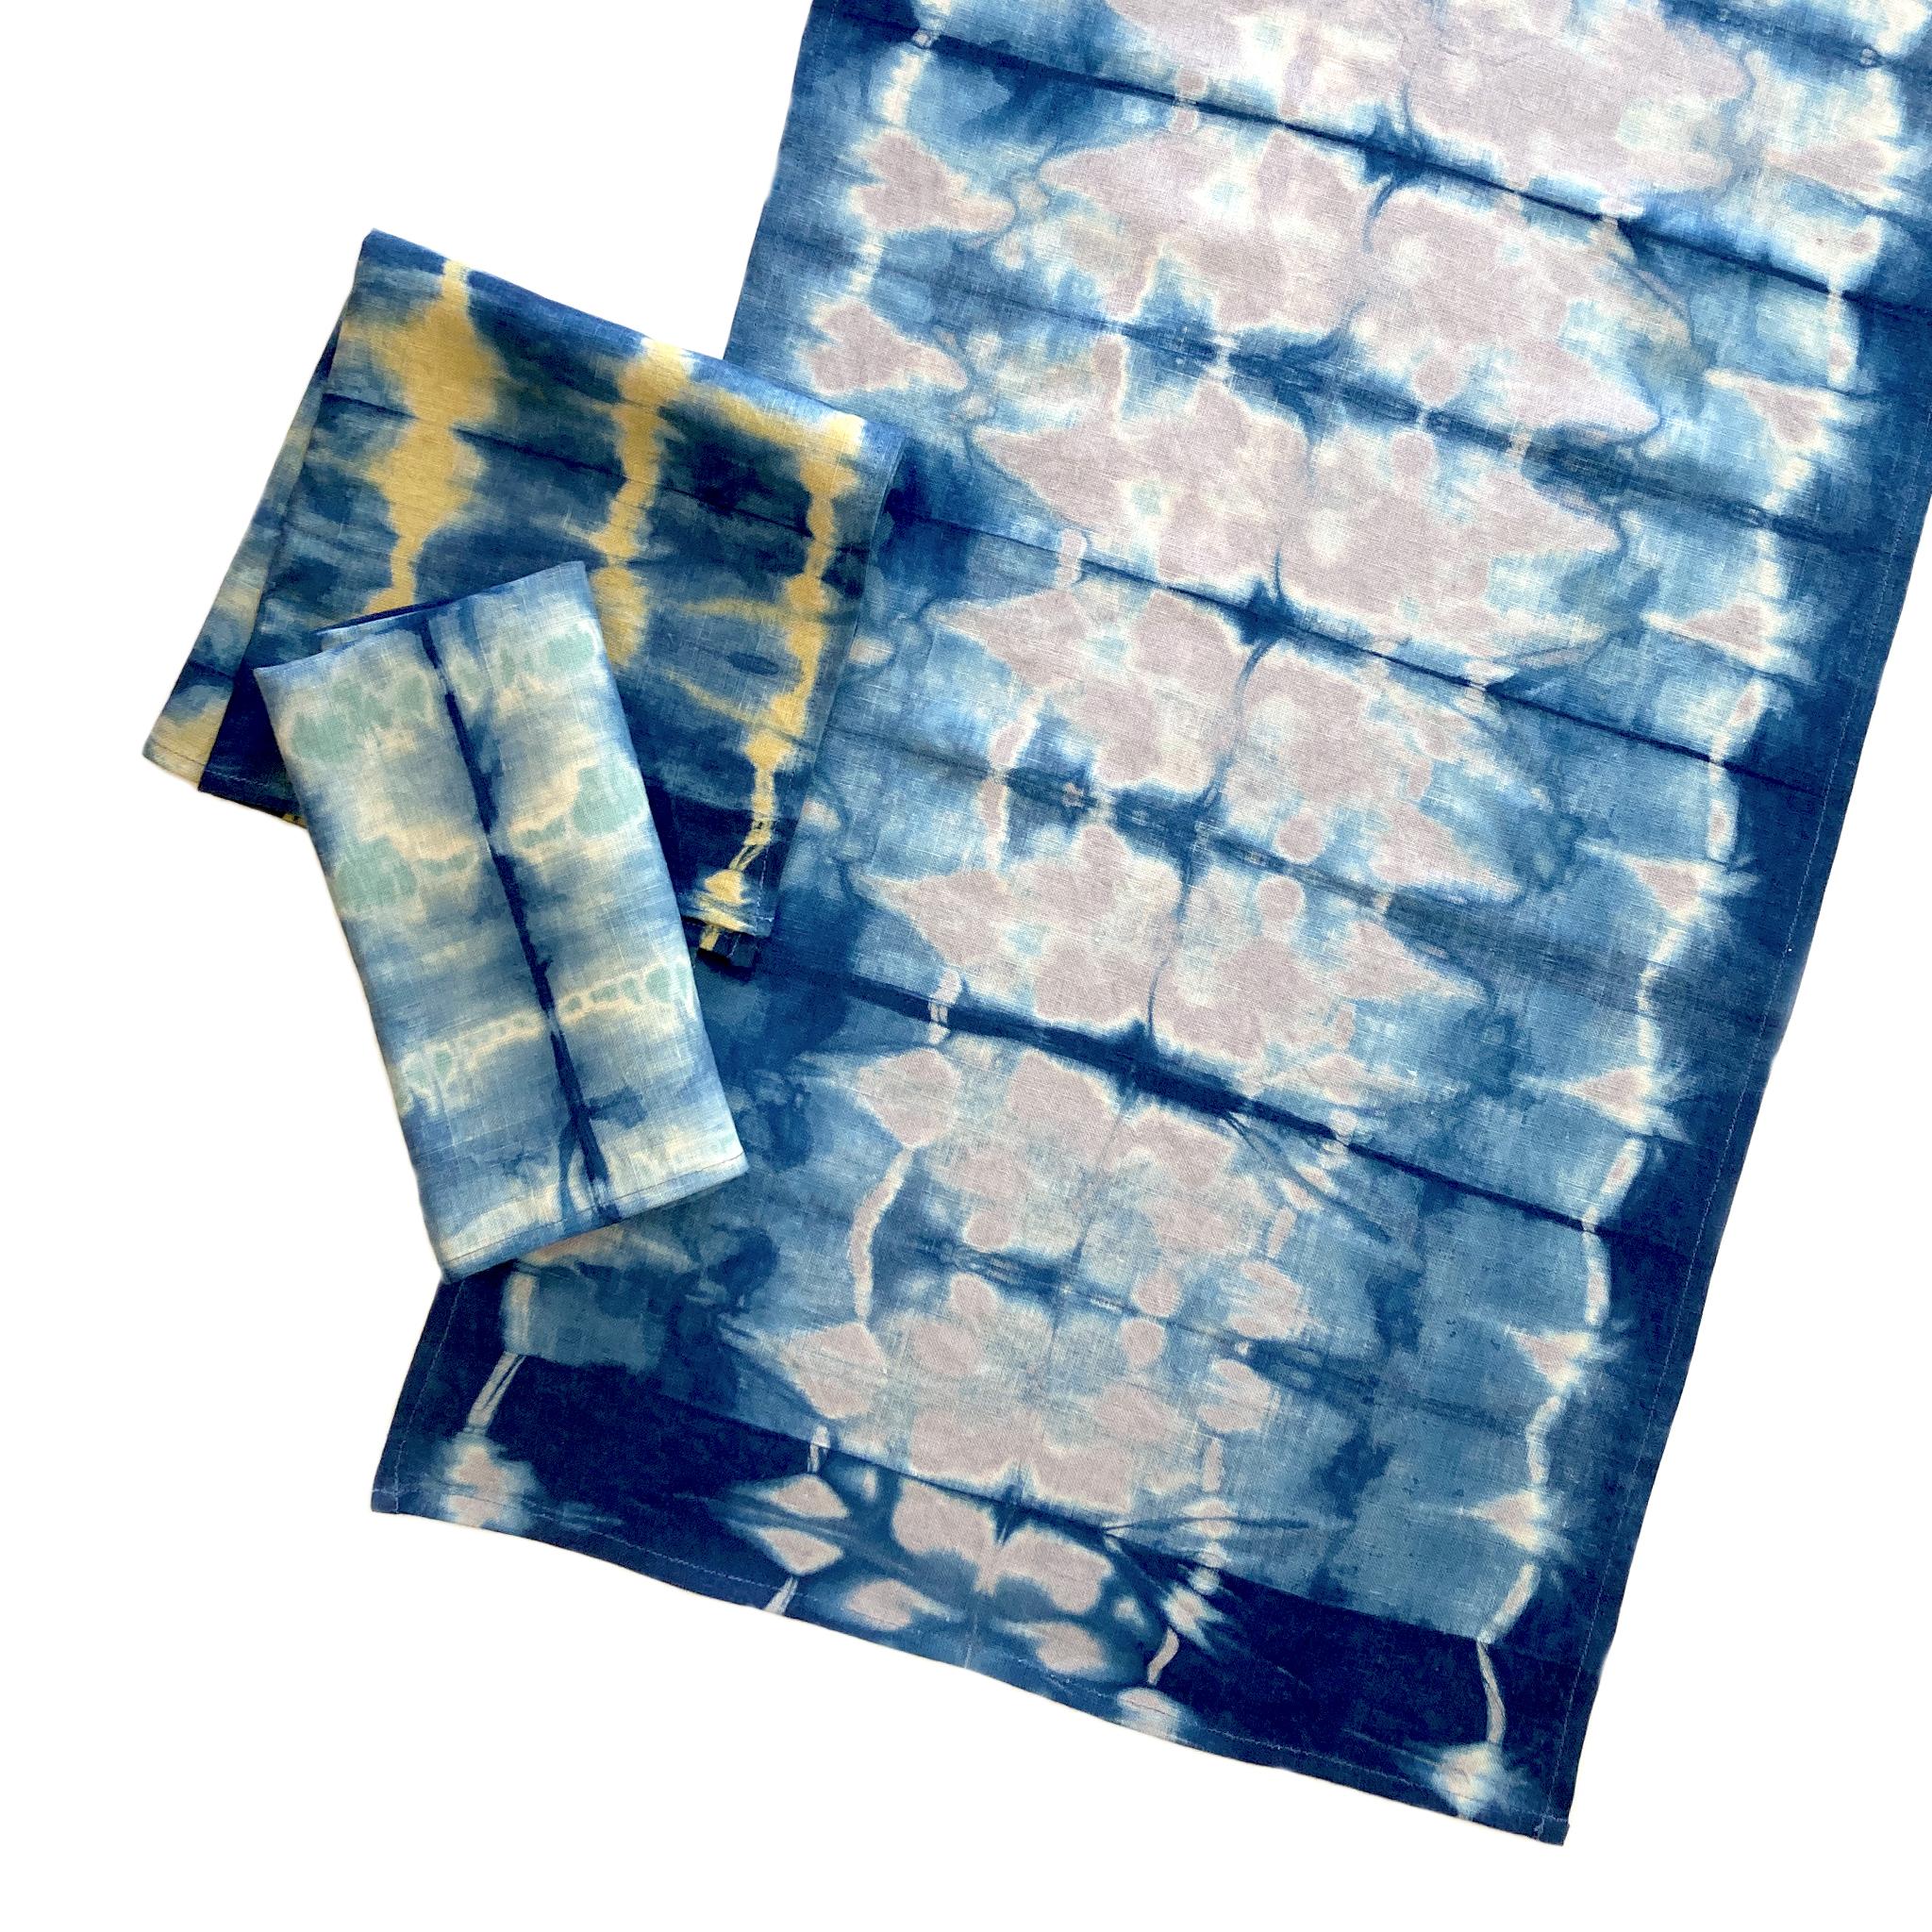 Silver gray linen table runner dyed with indigo in Pleat pattern. Hand-dyed and sewn in New York City. Runner measures approximately 18 x 72 inches. Each linen runner is hand dyed and one of a kind. 

Each linen panel is cut and folded by hand, in